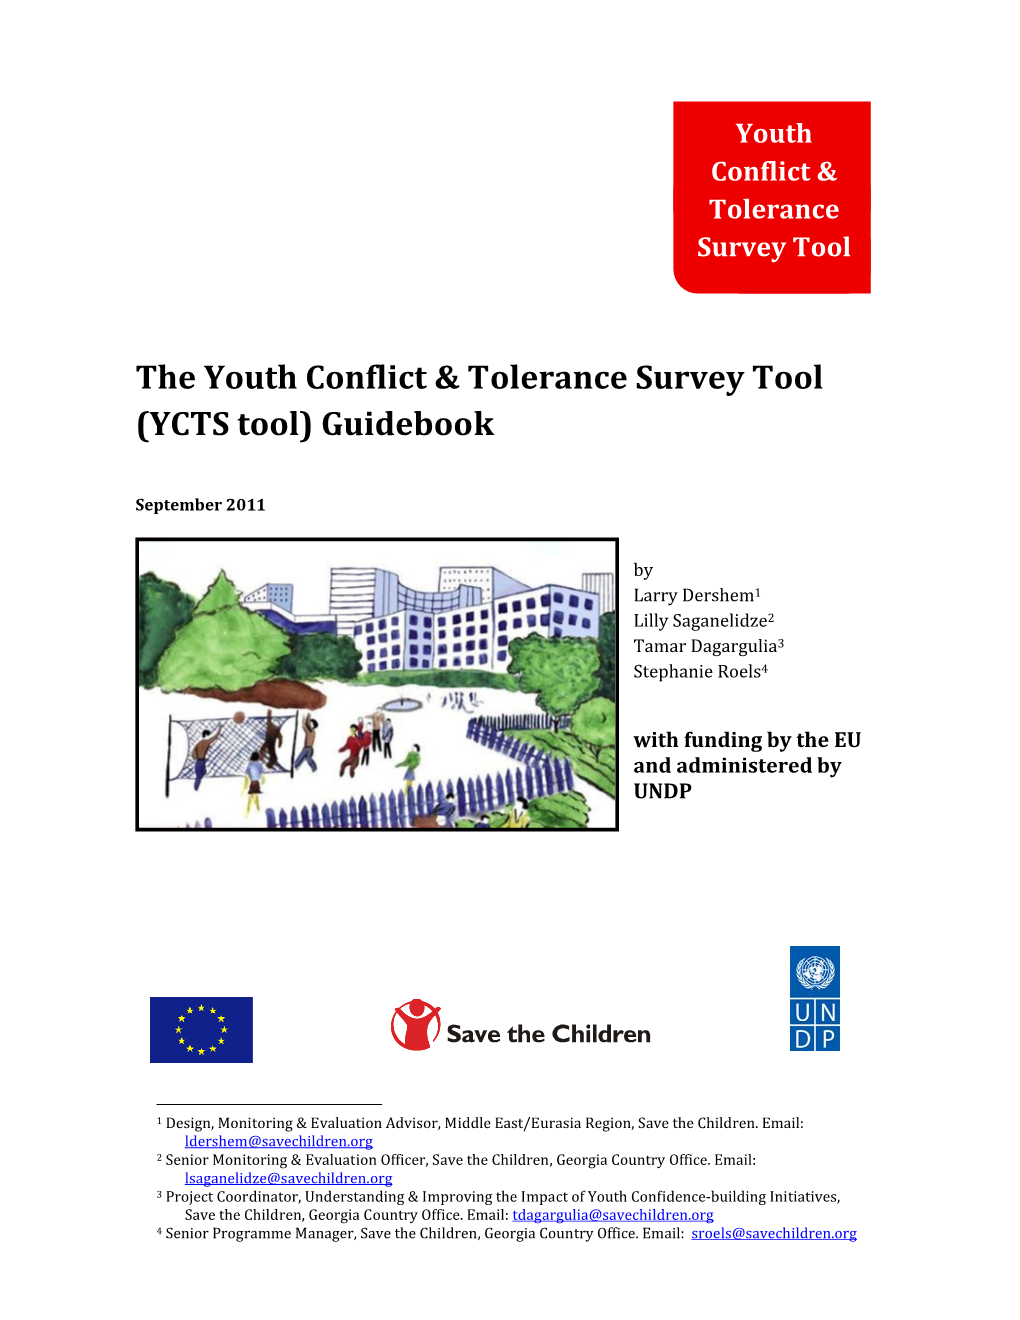 The Youth Conflict & Tolerance Survey Tool